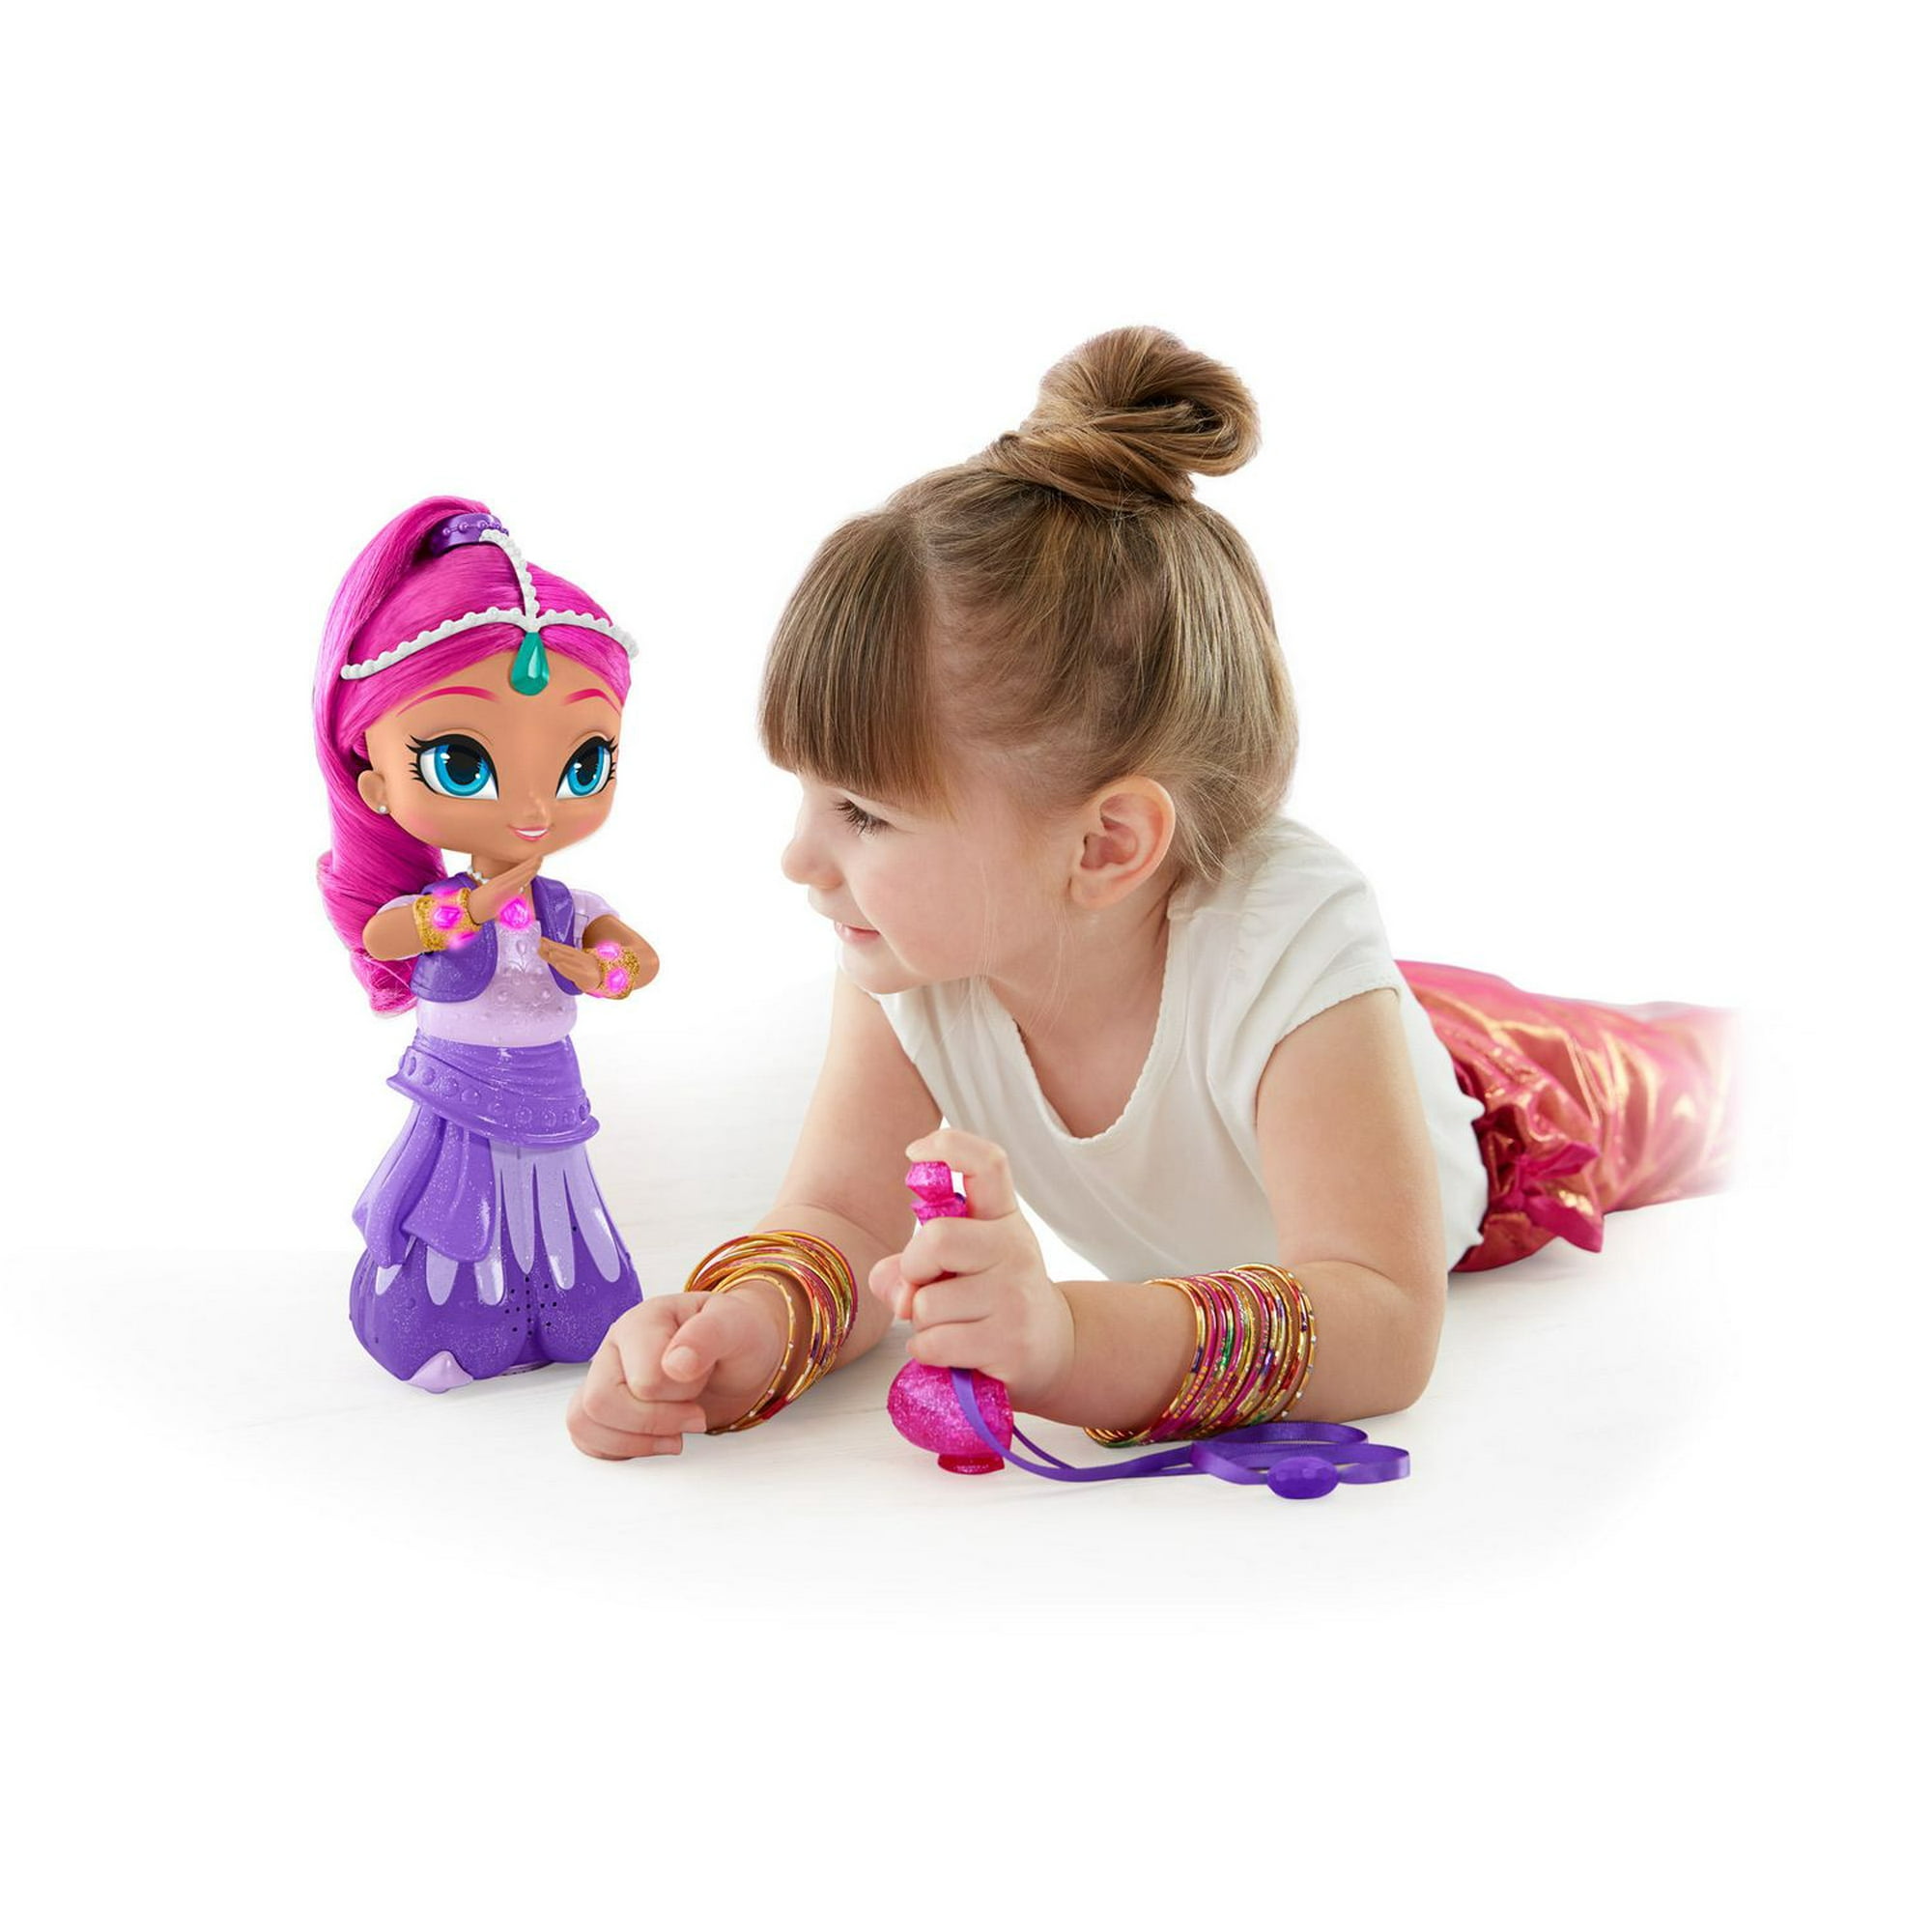 Buy Wicked Cool Toys shimmer and shine winter magic plush pink and